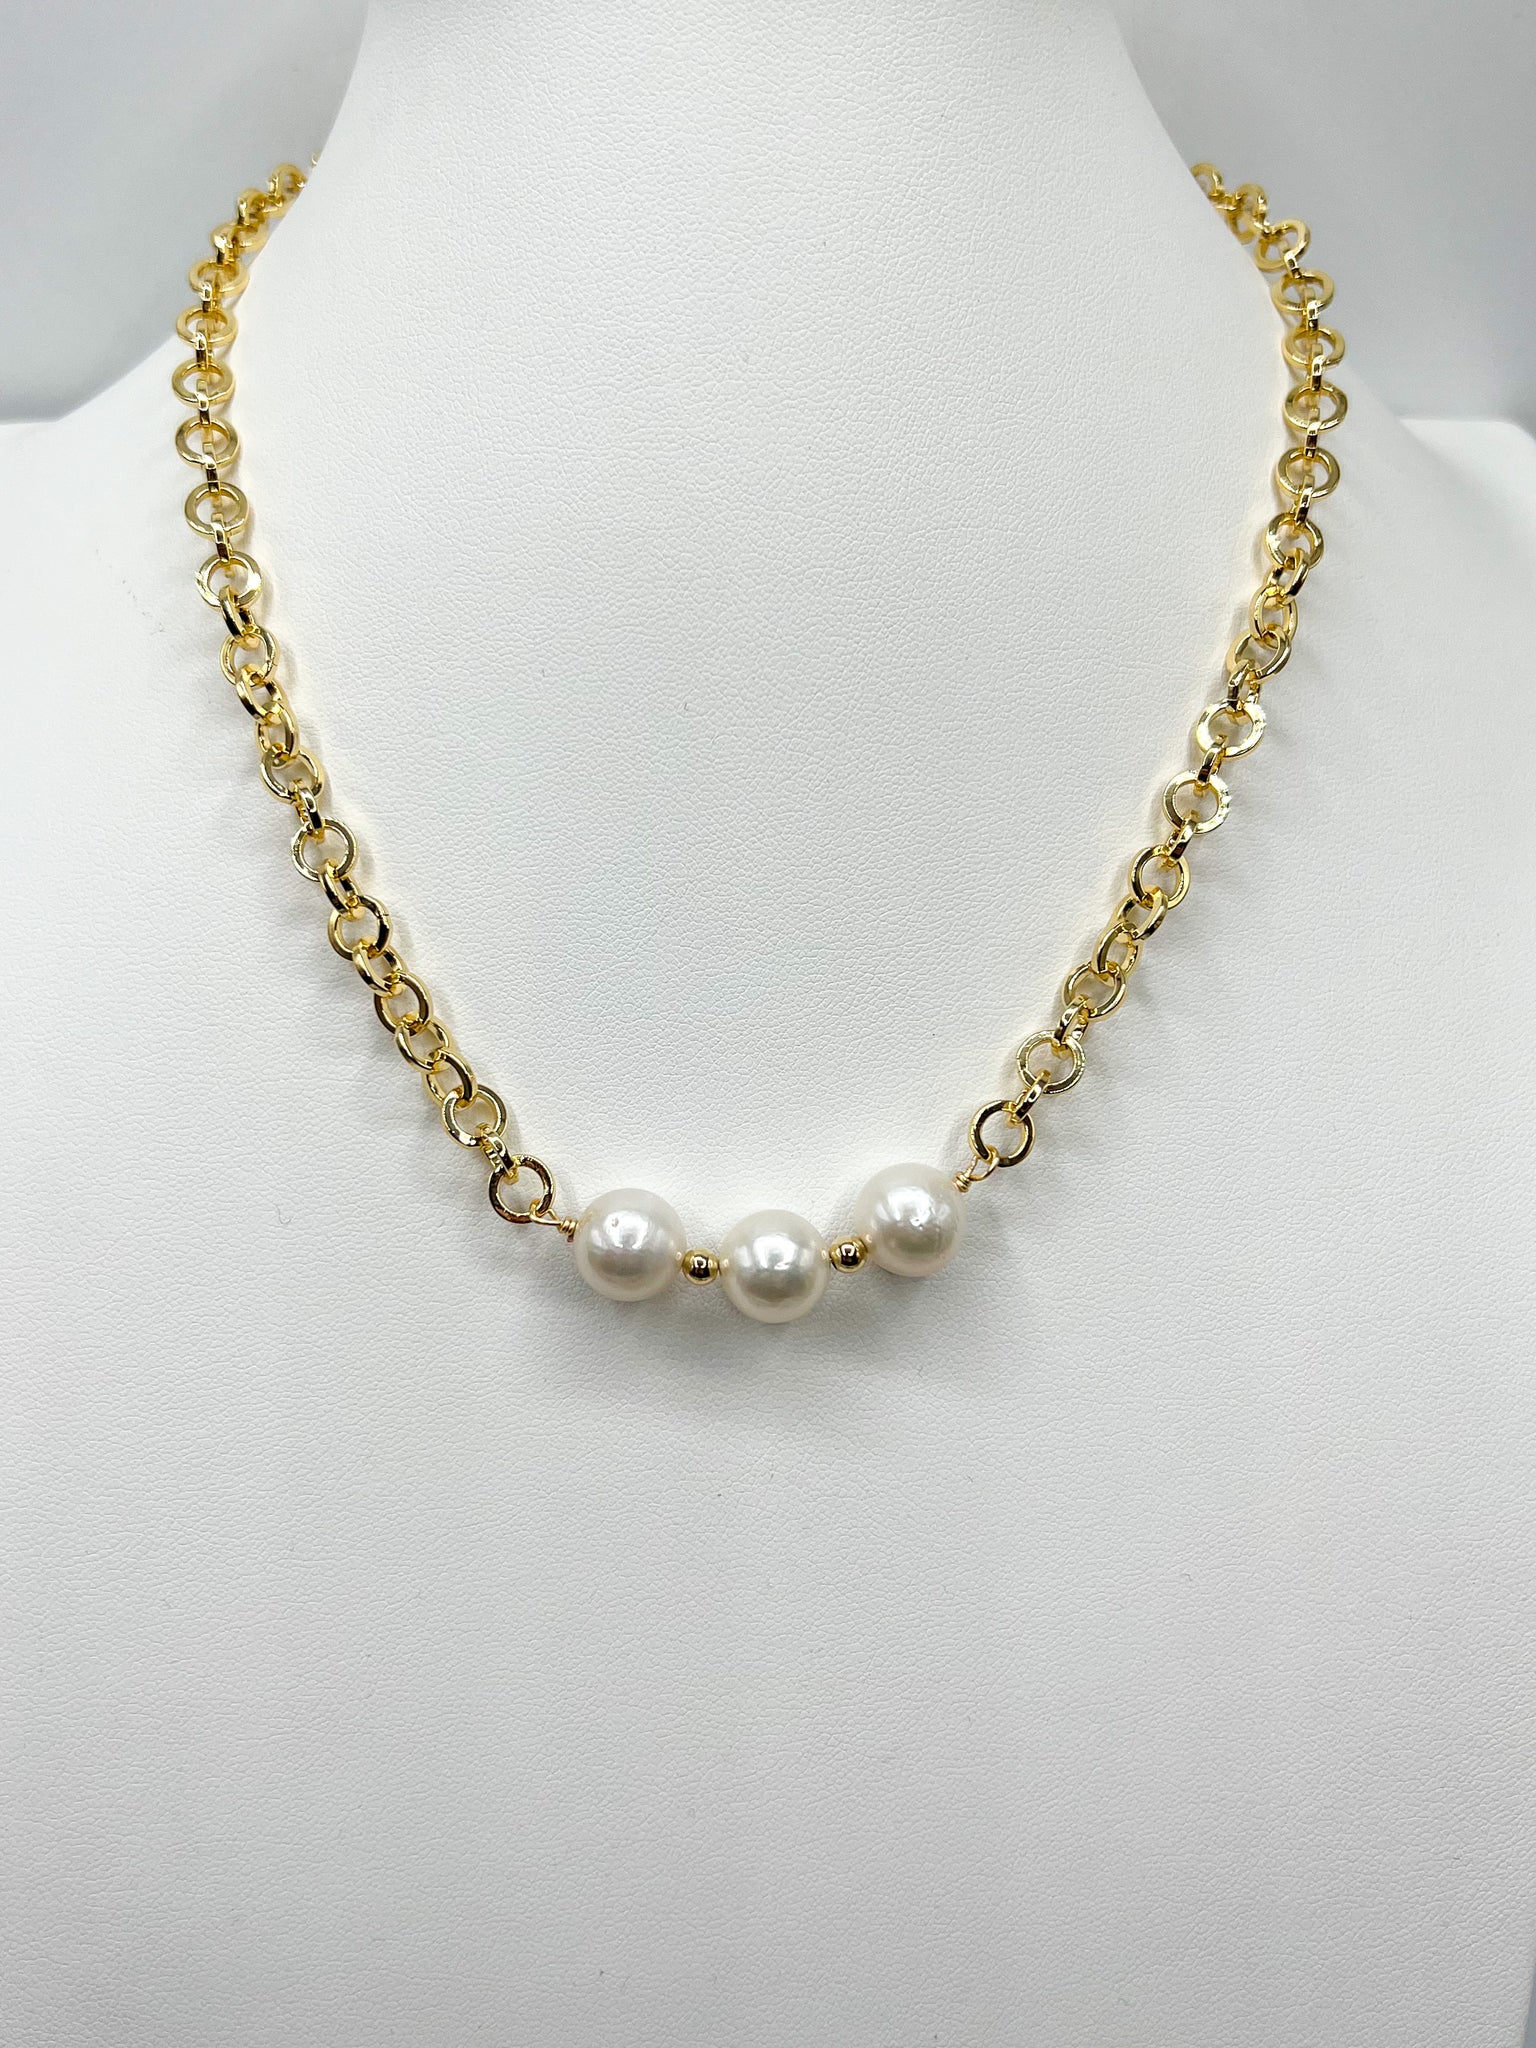 Three pearl necklace